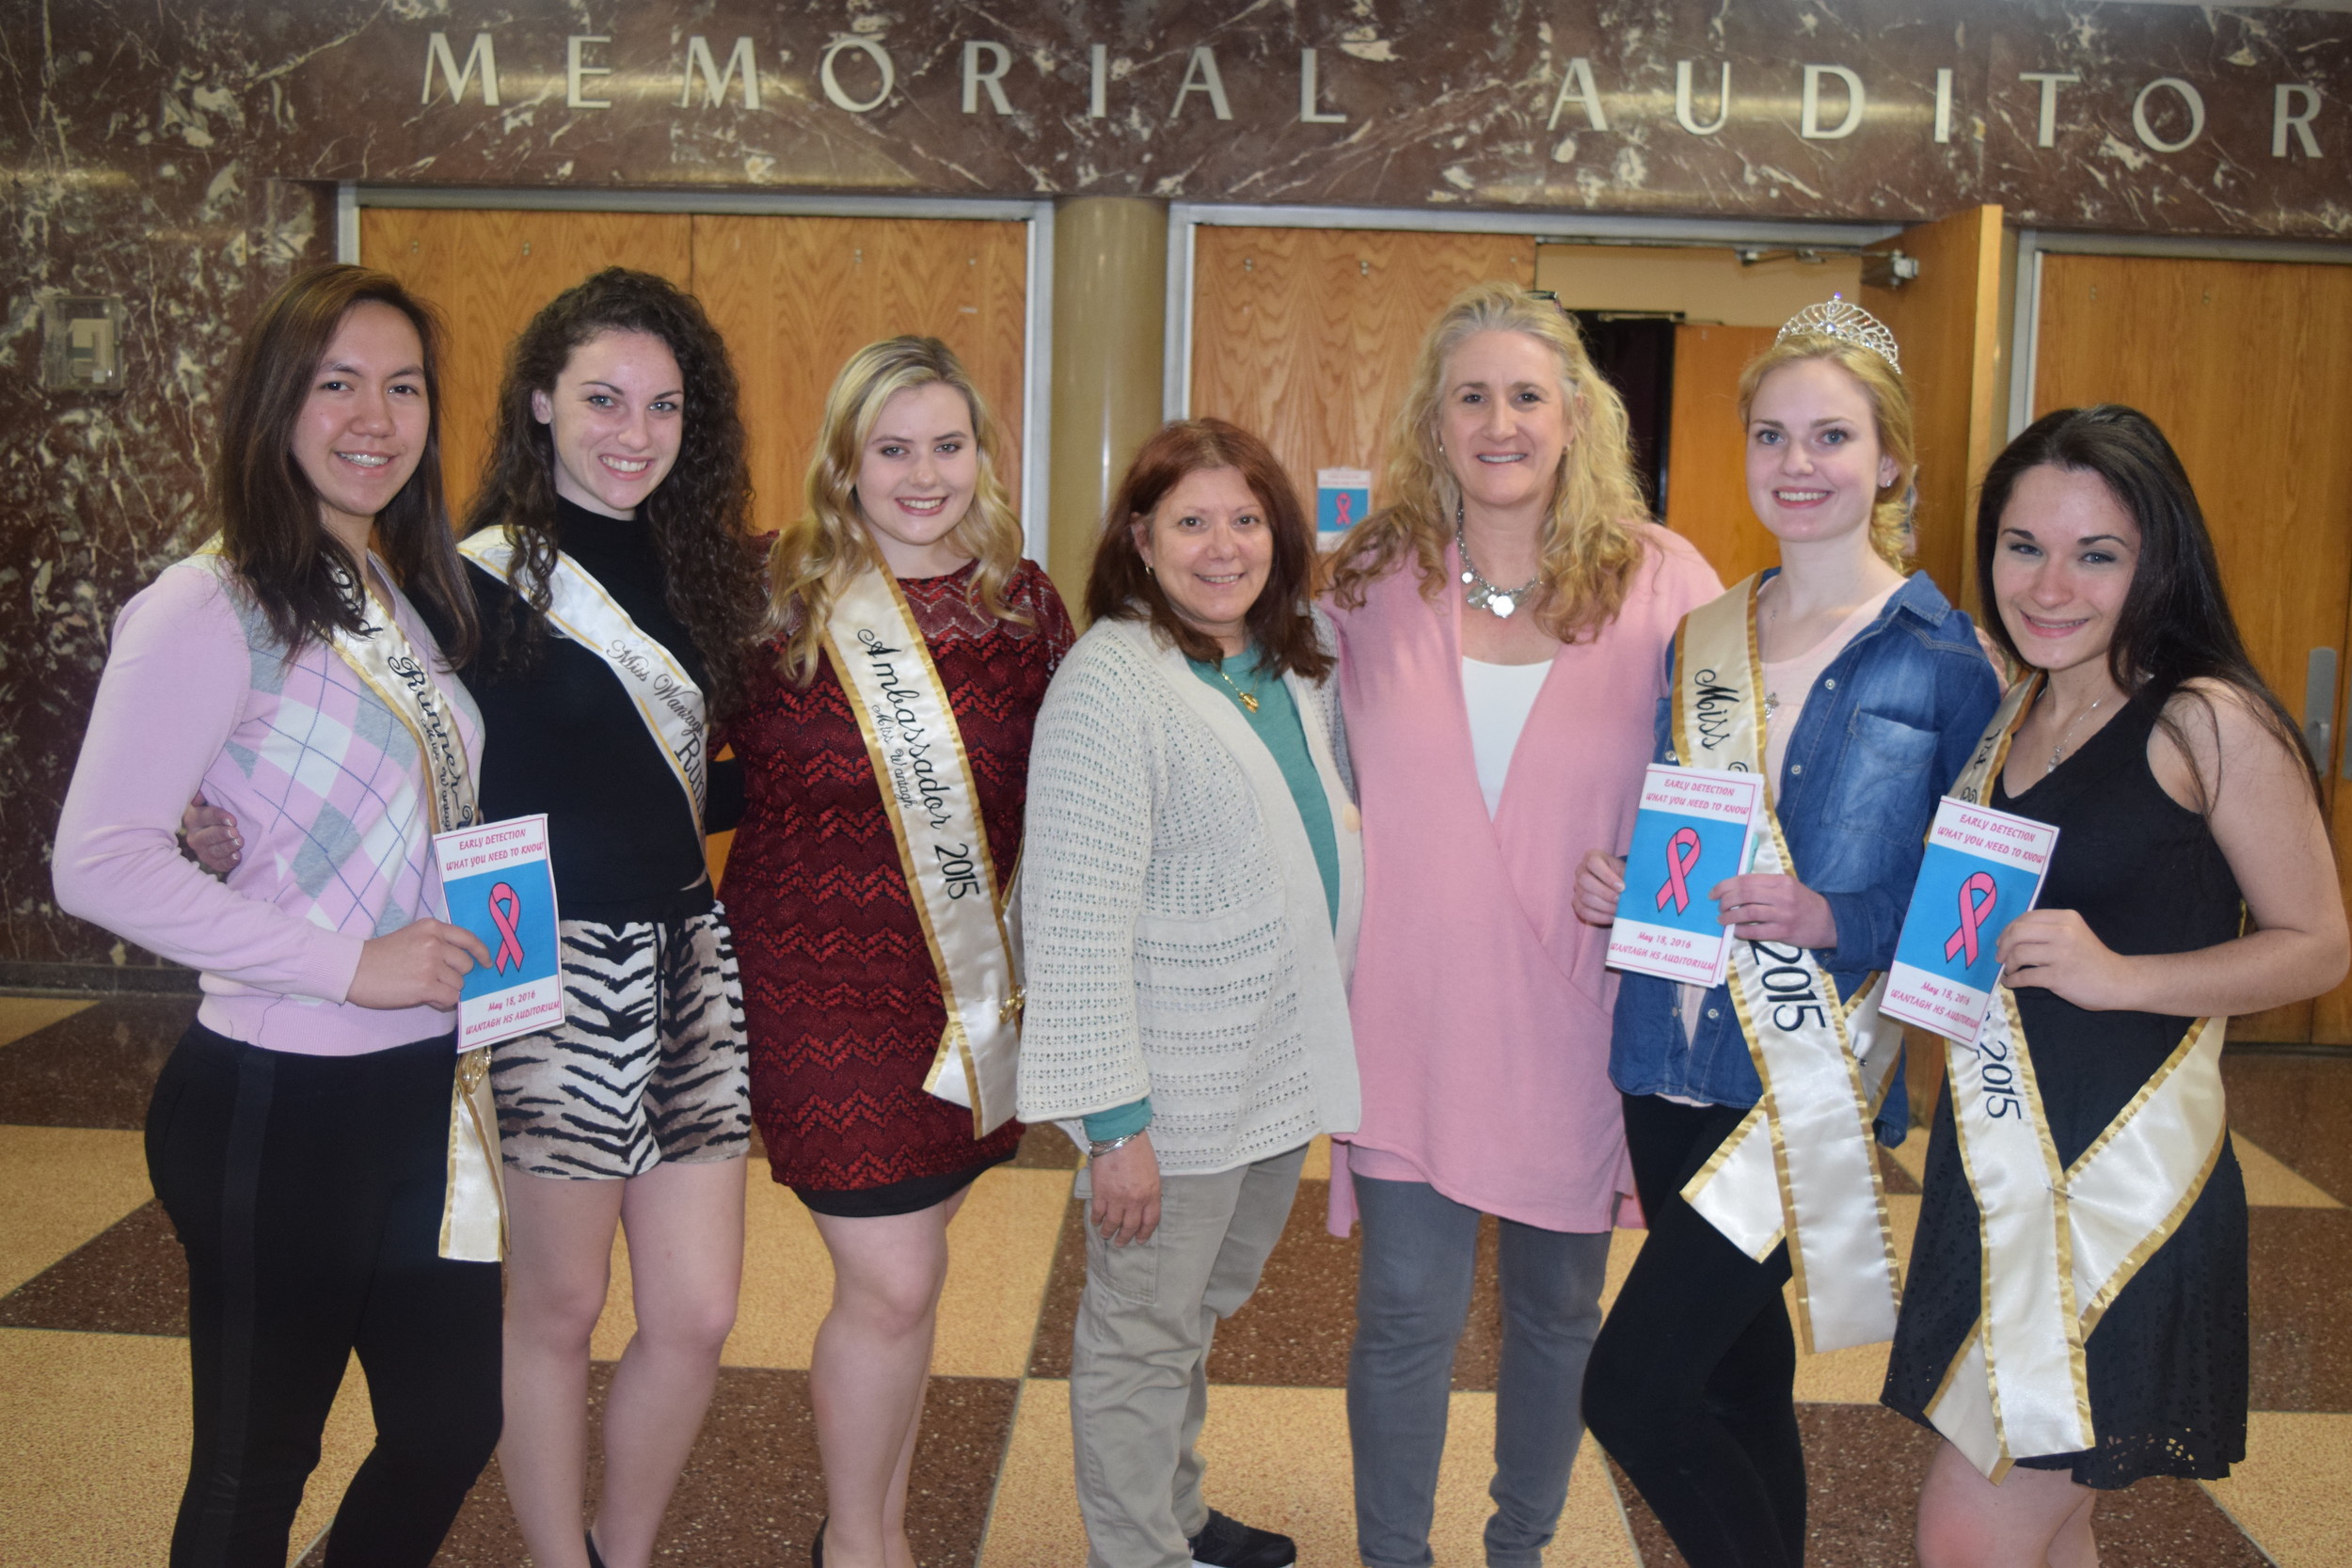 The Miss Wantagh Court attended the event in support of Emma Carey’s community mission. From left were Nyatasha Jackowicz, Nicole Ninivaggi, Carey, breast cancer survivor Dolores Persky, health education teacher Lisa Fugazzi, Miss Wantagh Keri Balnis and Ruth Kupperberg.